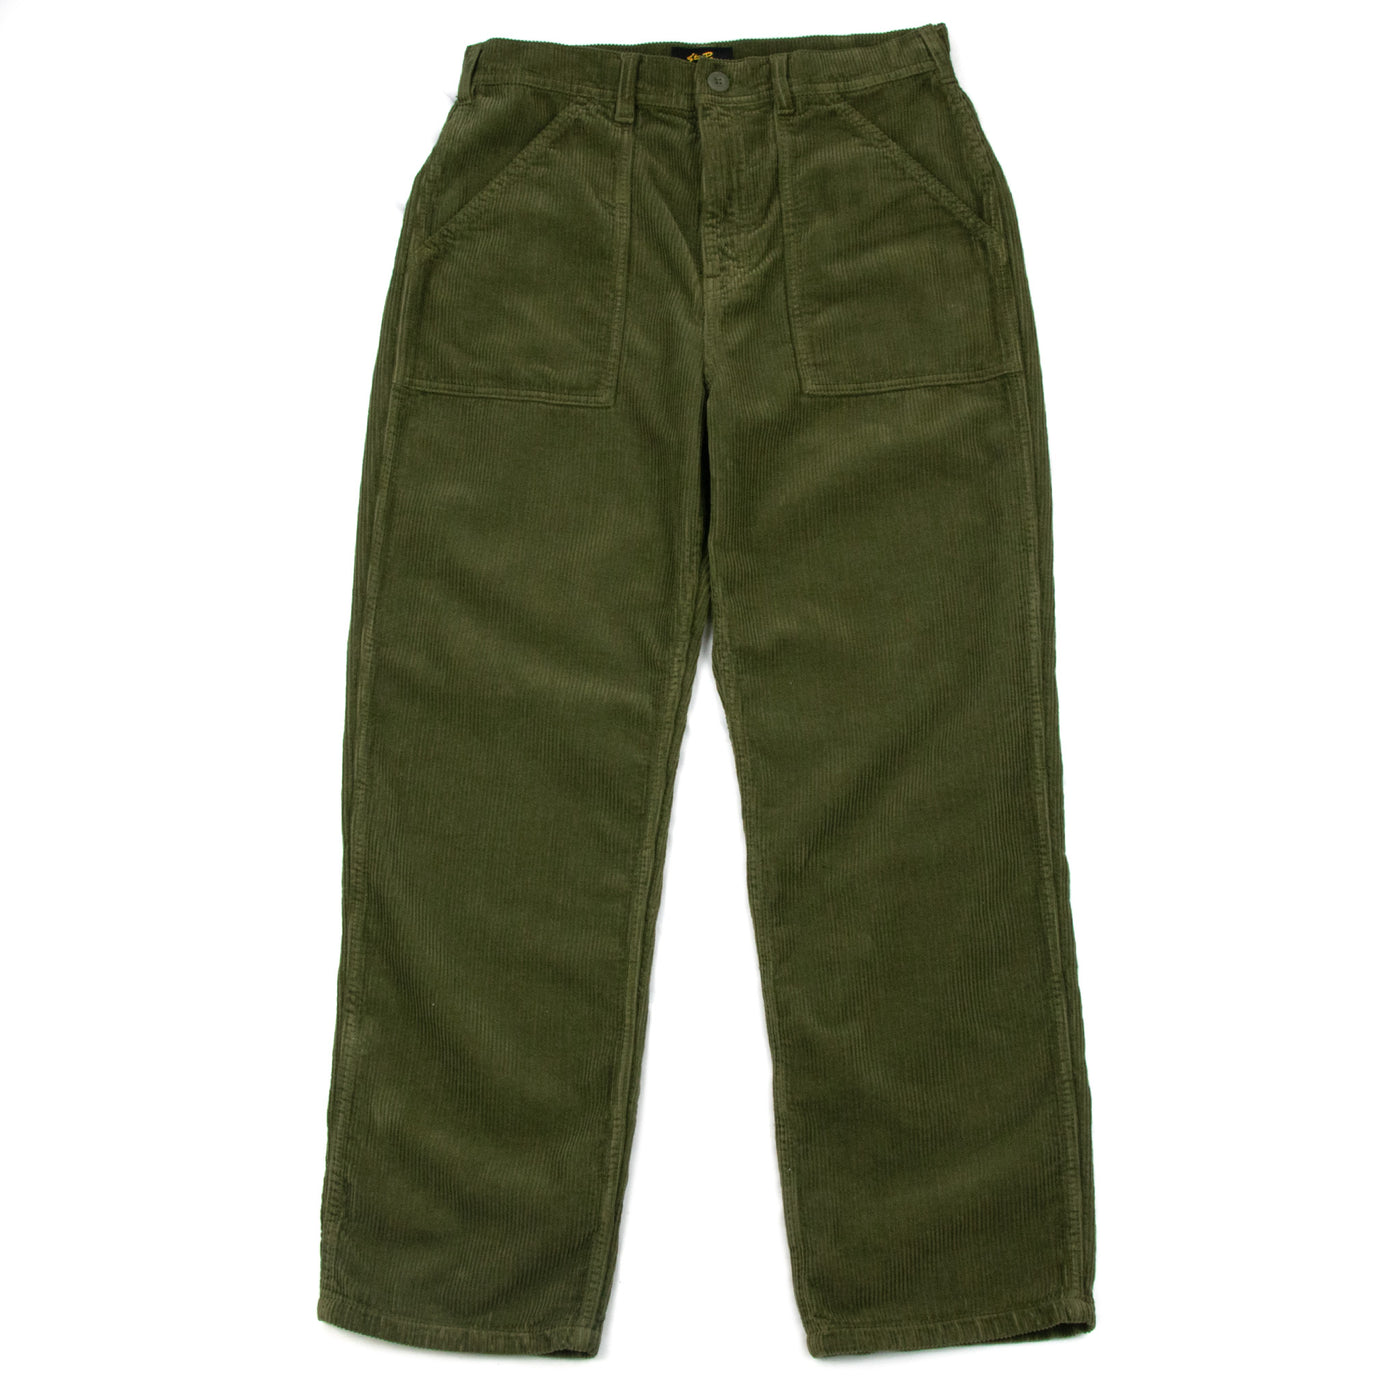 Stan Ray Fat Pant Olive Cord Front